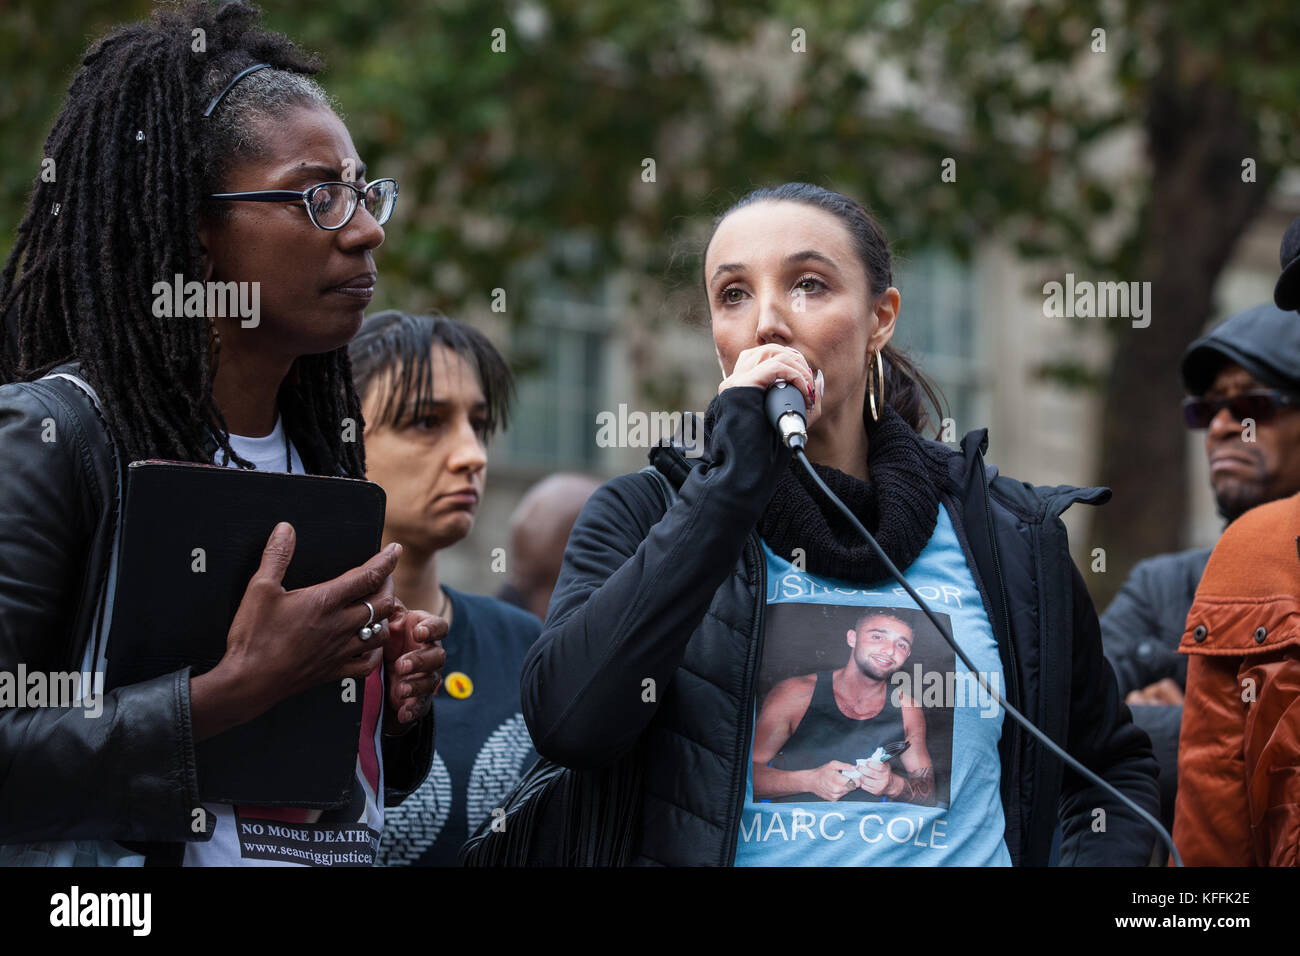 London, UK. 28th October, 2017. Lisa Cole, sister of Marc Cole, addresses campaigners from the United Families and Friends Campaign (UFFC) following their annual procession in remembrance of family members and friends who died in police custody, prison, immigration detention or secure psychiatric hospitals. Marc Cole, 30, died after being tasered by police called to reports of a man 'slashing himself' with a knife in Falmouth in May 2017. Credit: Mark Kerrison/Alamy Live News Stock Photo